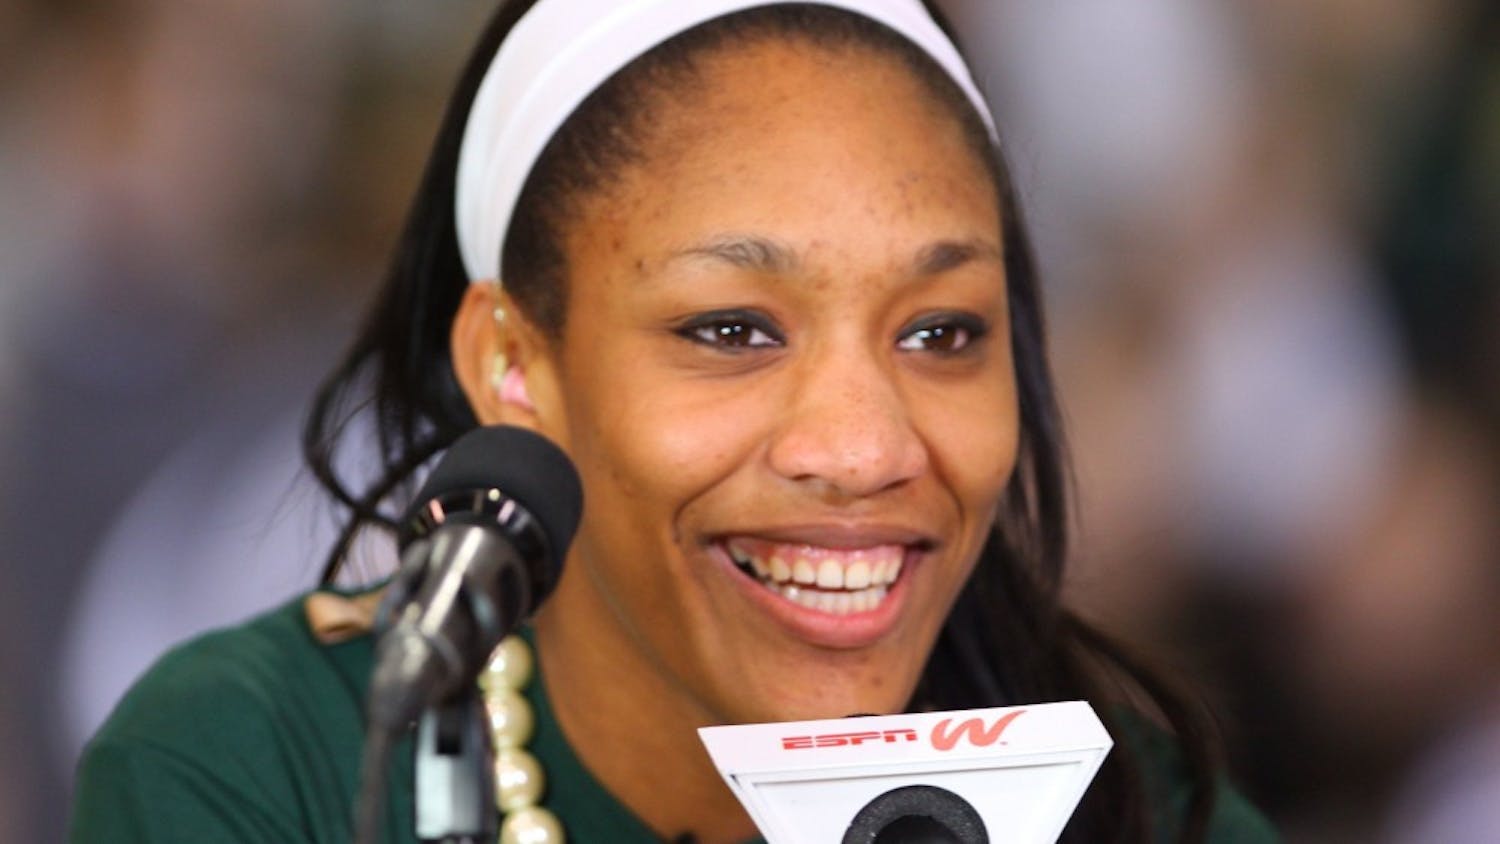 Top national prospect A'ja Wilson concluded a year of heavy recruiting with a few simple words. "I will be attending the University of South Carolina," she said on Wednesday, April 16, 2014. Wilson pledged to USC at Heathwood Hall Episcopal School, surrounded by family and friends who loudly applauded as she once again flashed her familiar smile. Telling the decision to ESPNU simultaneously, Wilson didn't pause for any dramatics, knowing that the past year where she kept her thinking to herself had been dramatic enough. (Tracy Glantz/The State/MCT)